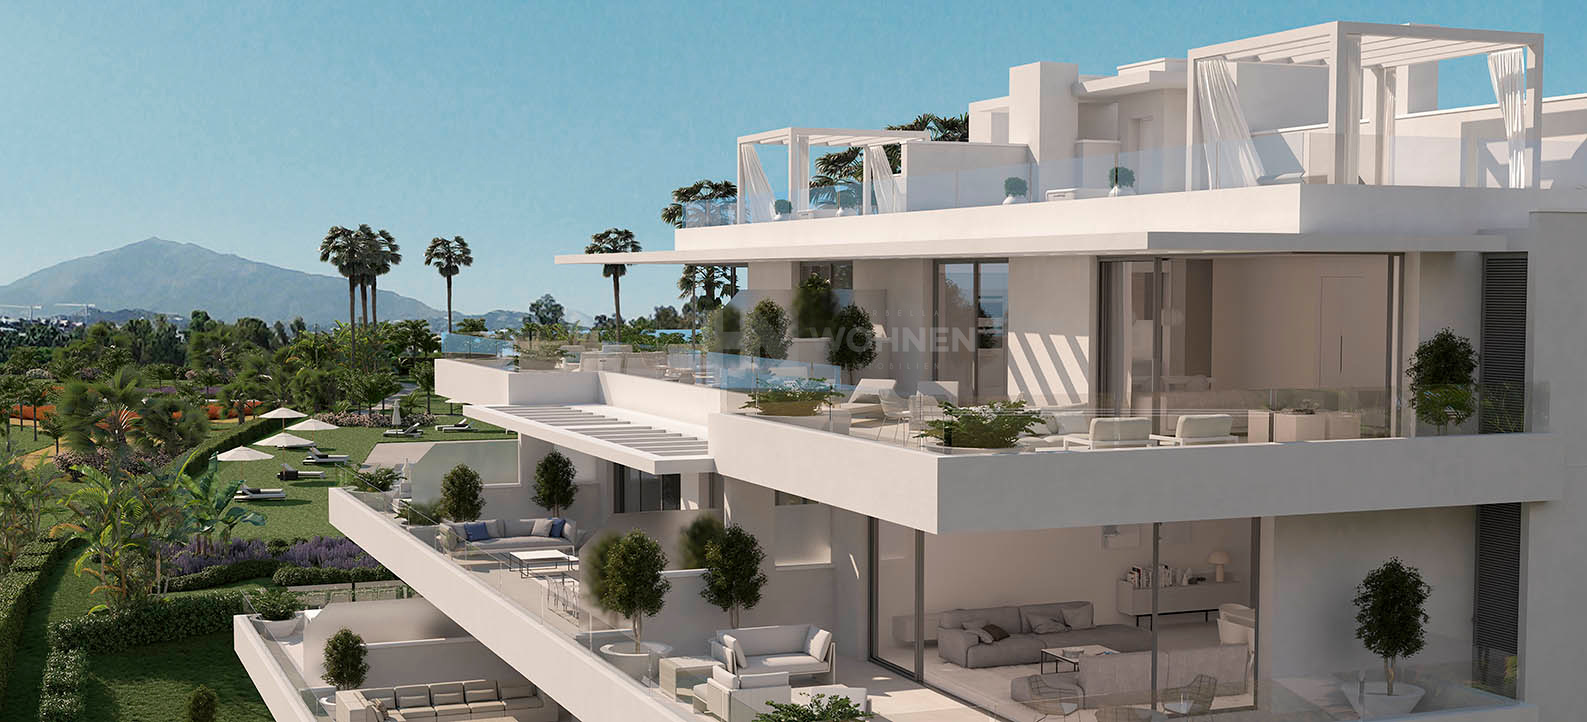 Luxury modern apartments and penthouses with outstanding views